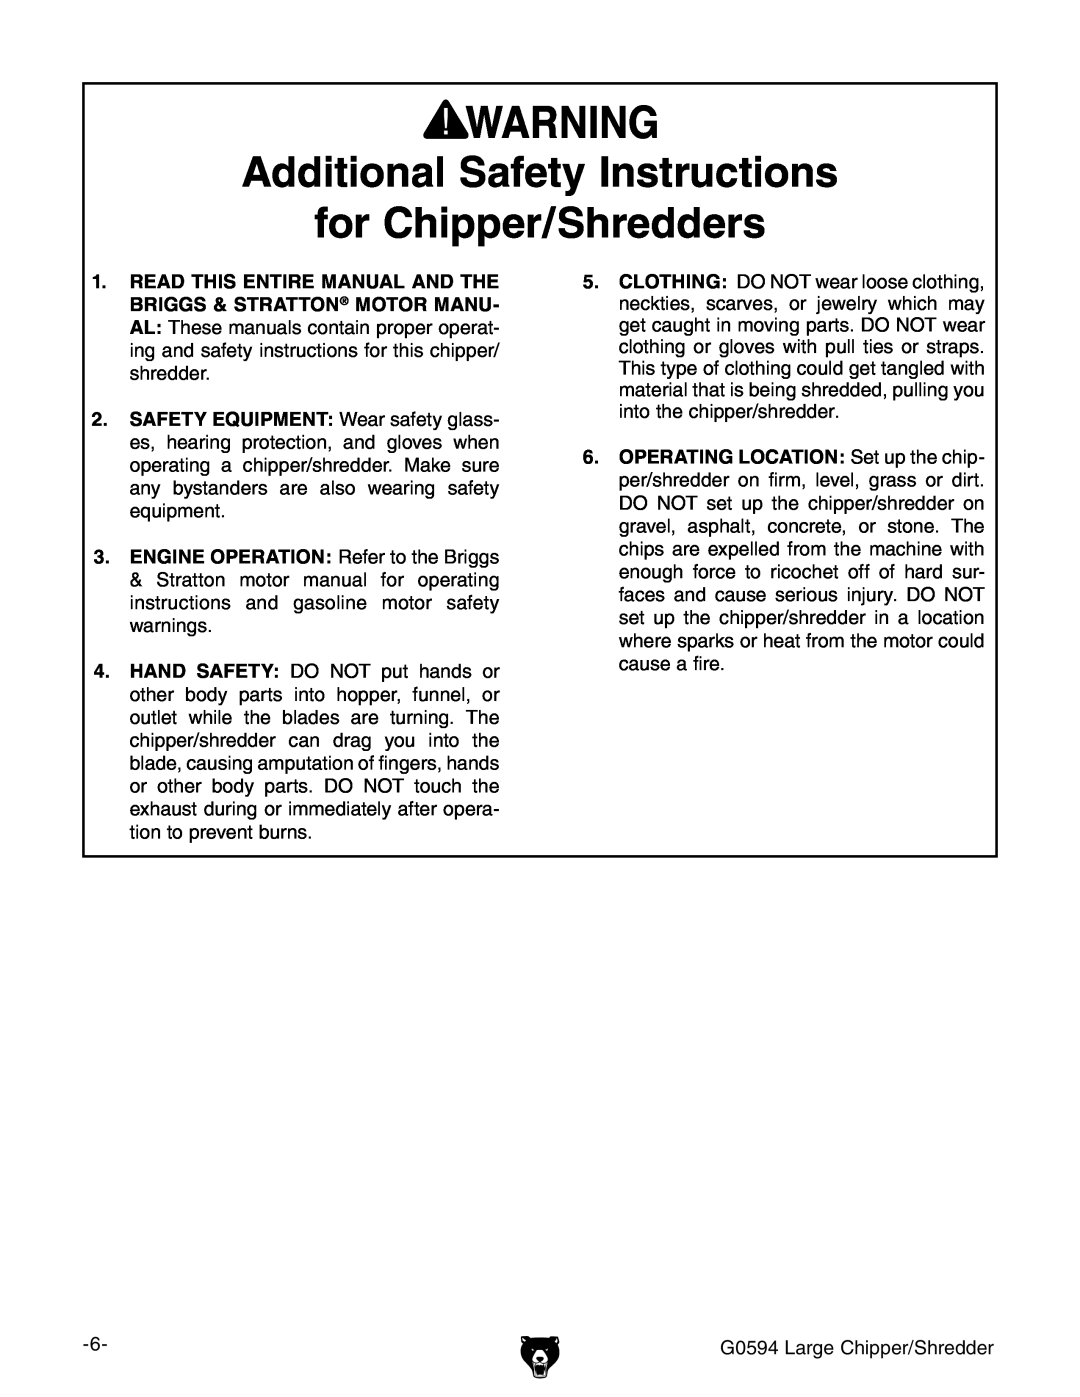 Grizzly G0594 owner manual Additional Safety Instructions, for Chipper/Shredders 